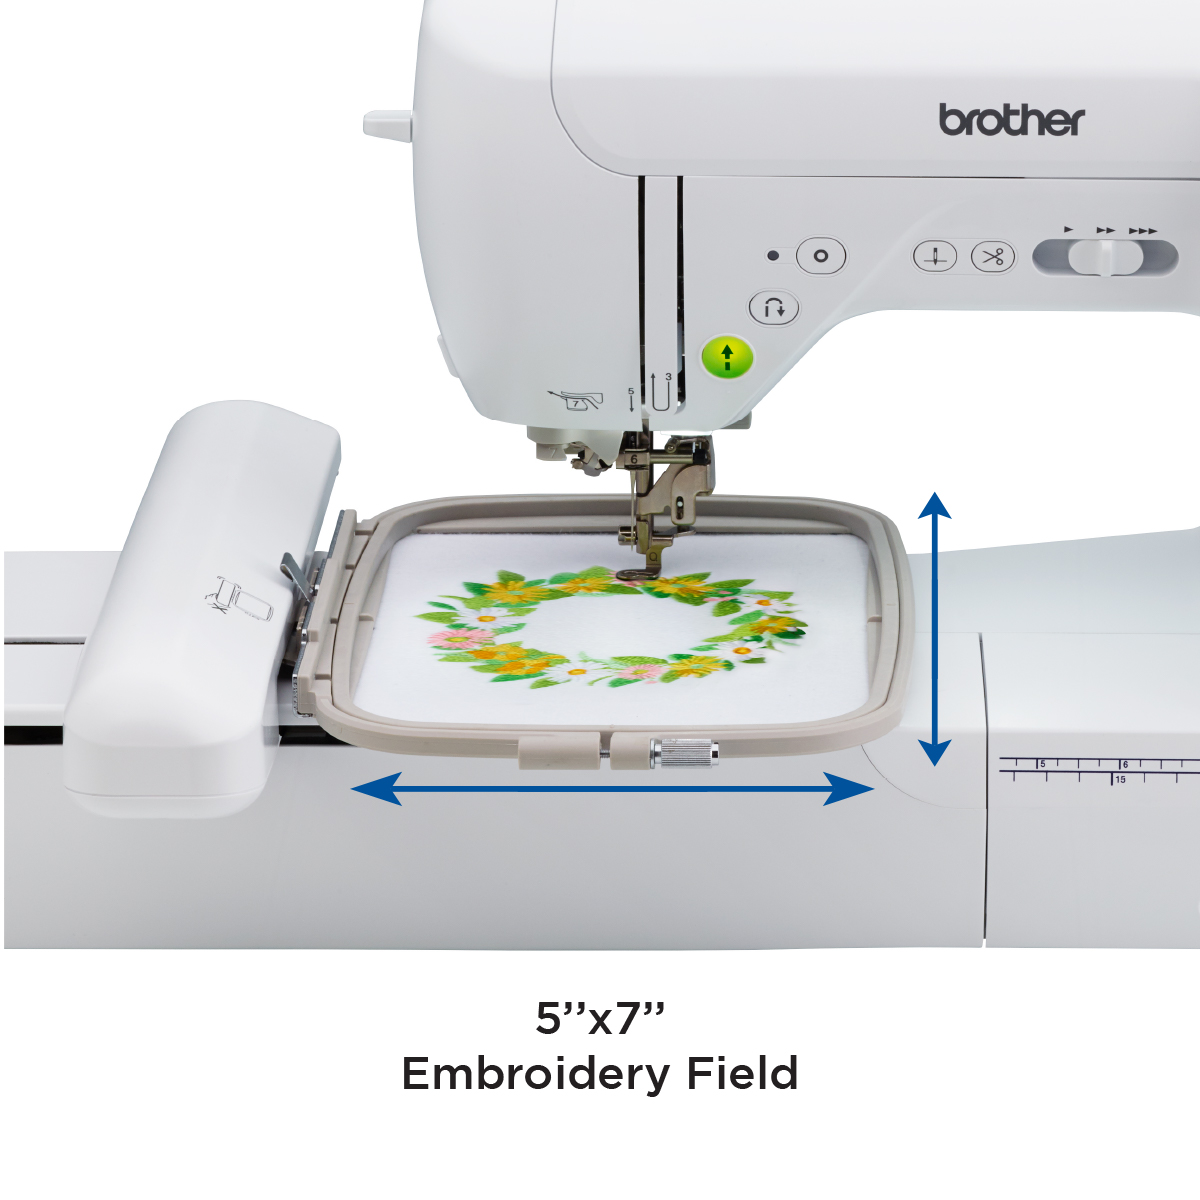 Brother SE1900 Computerized Sewing and Embroidery Machine with 240 Built-in Designs - image 3 of 14